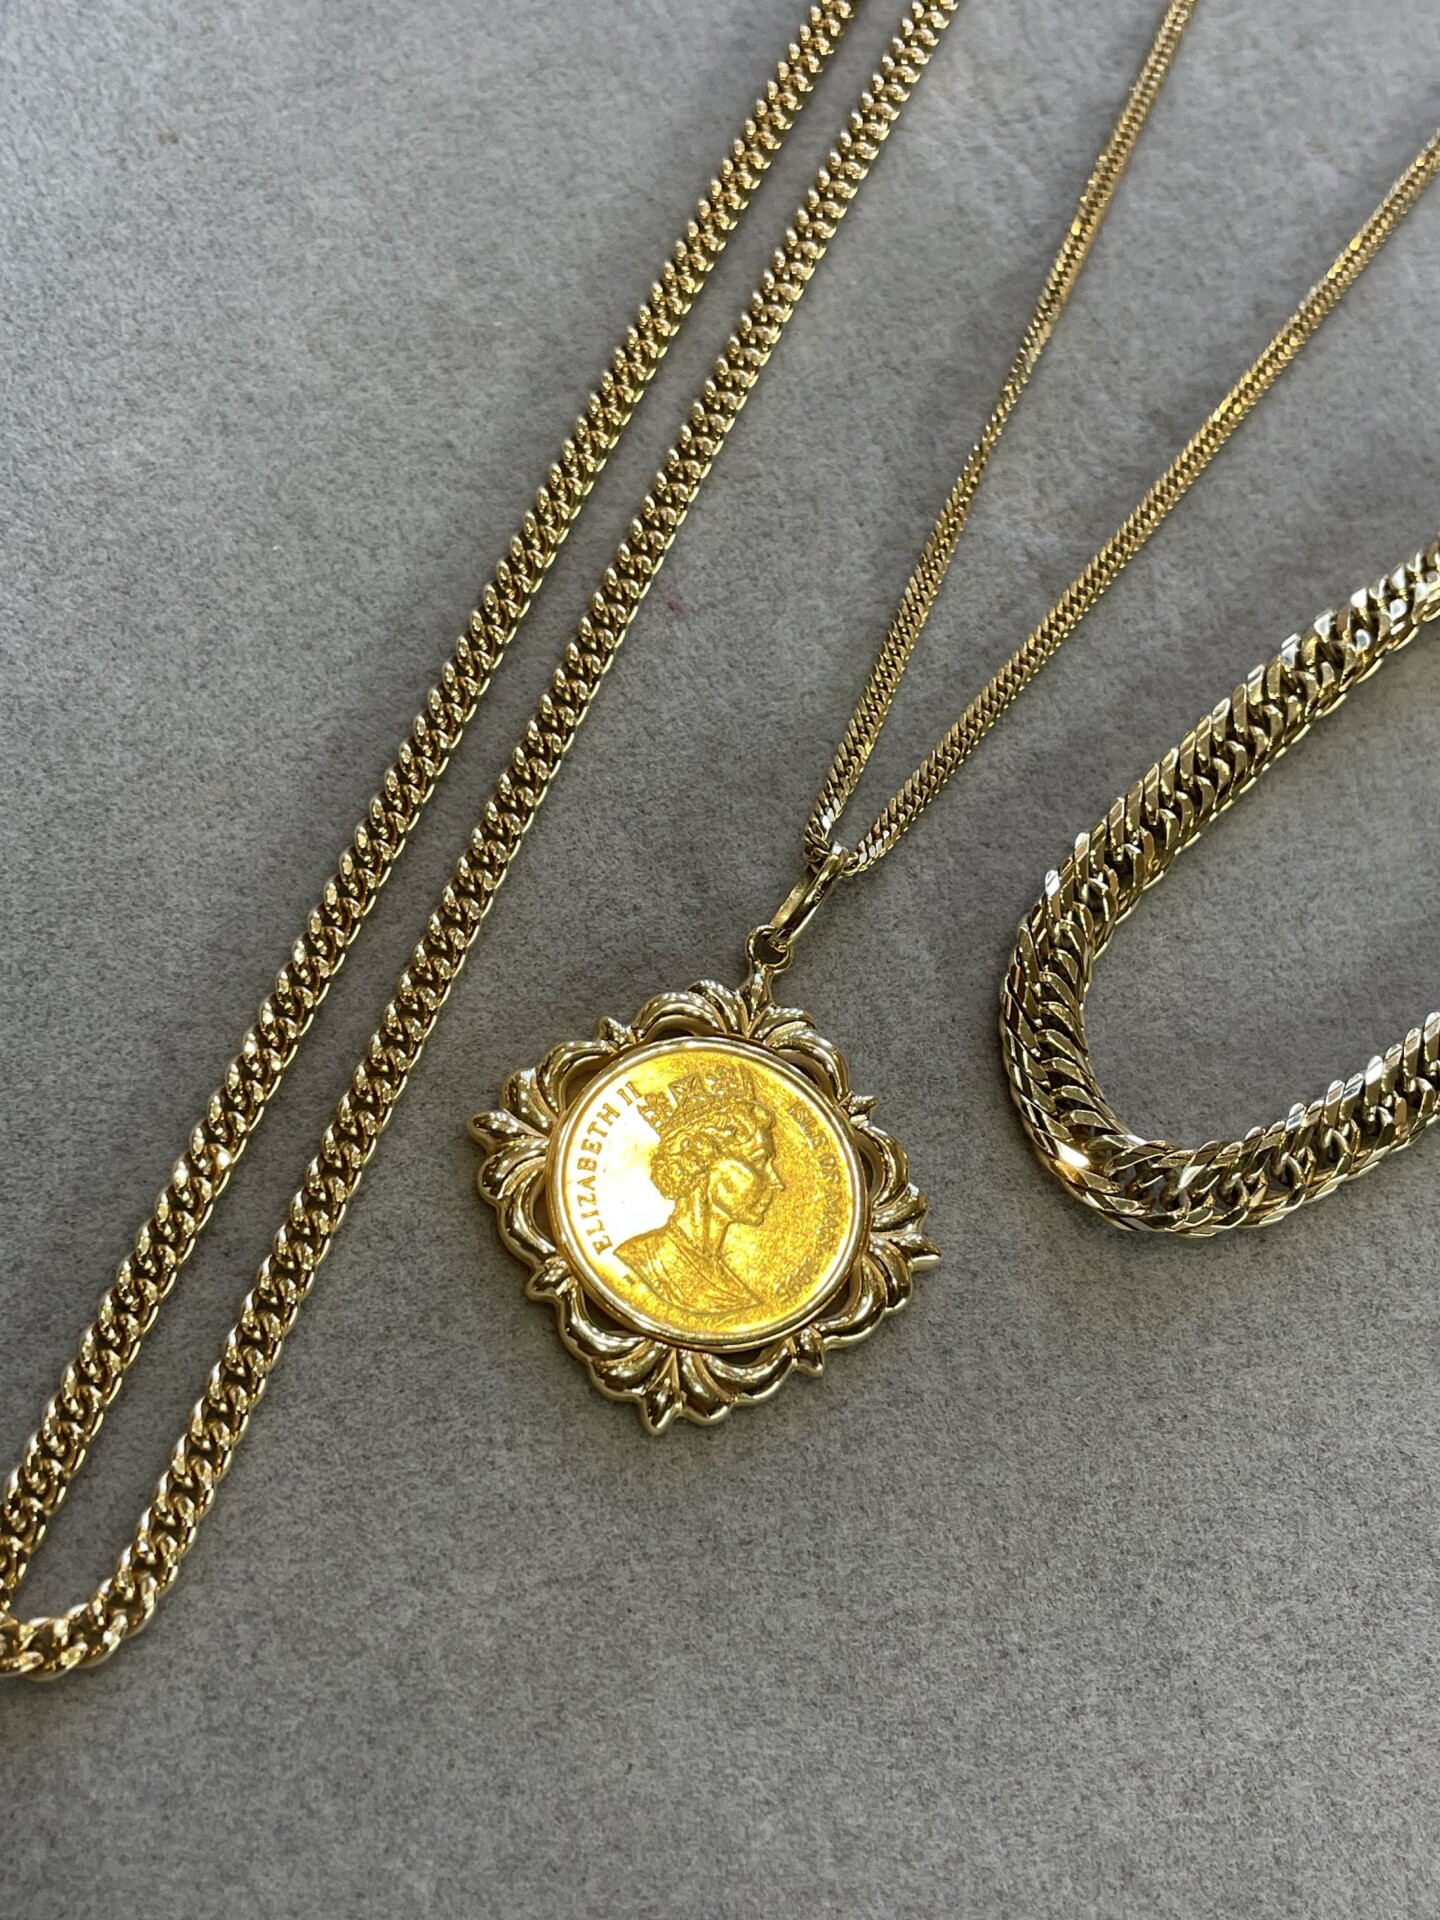 Pure gold coin necklace at Kihei necklace.